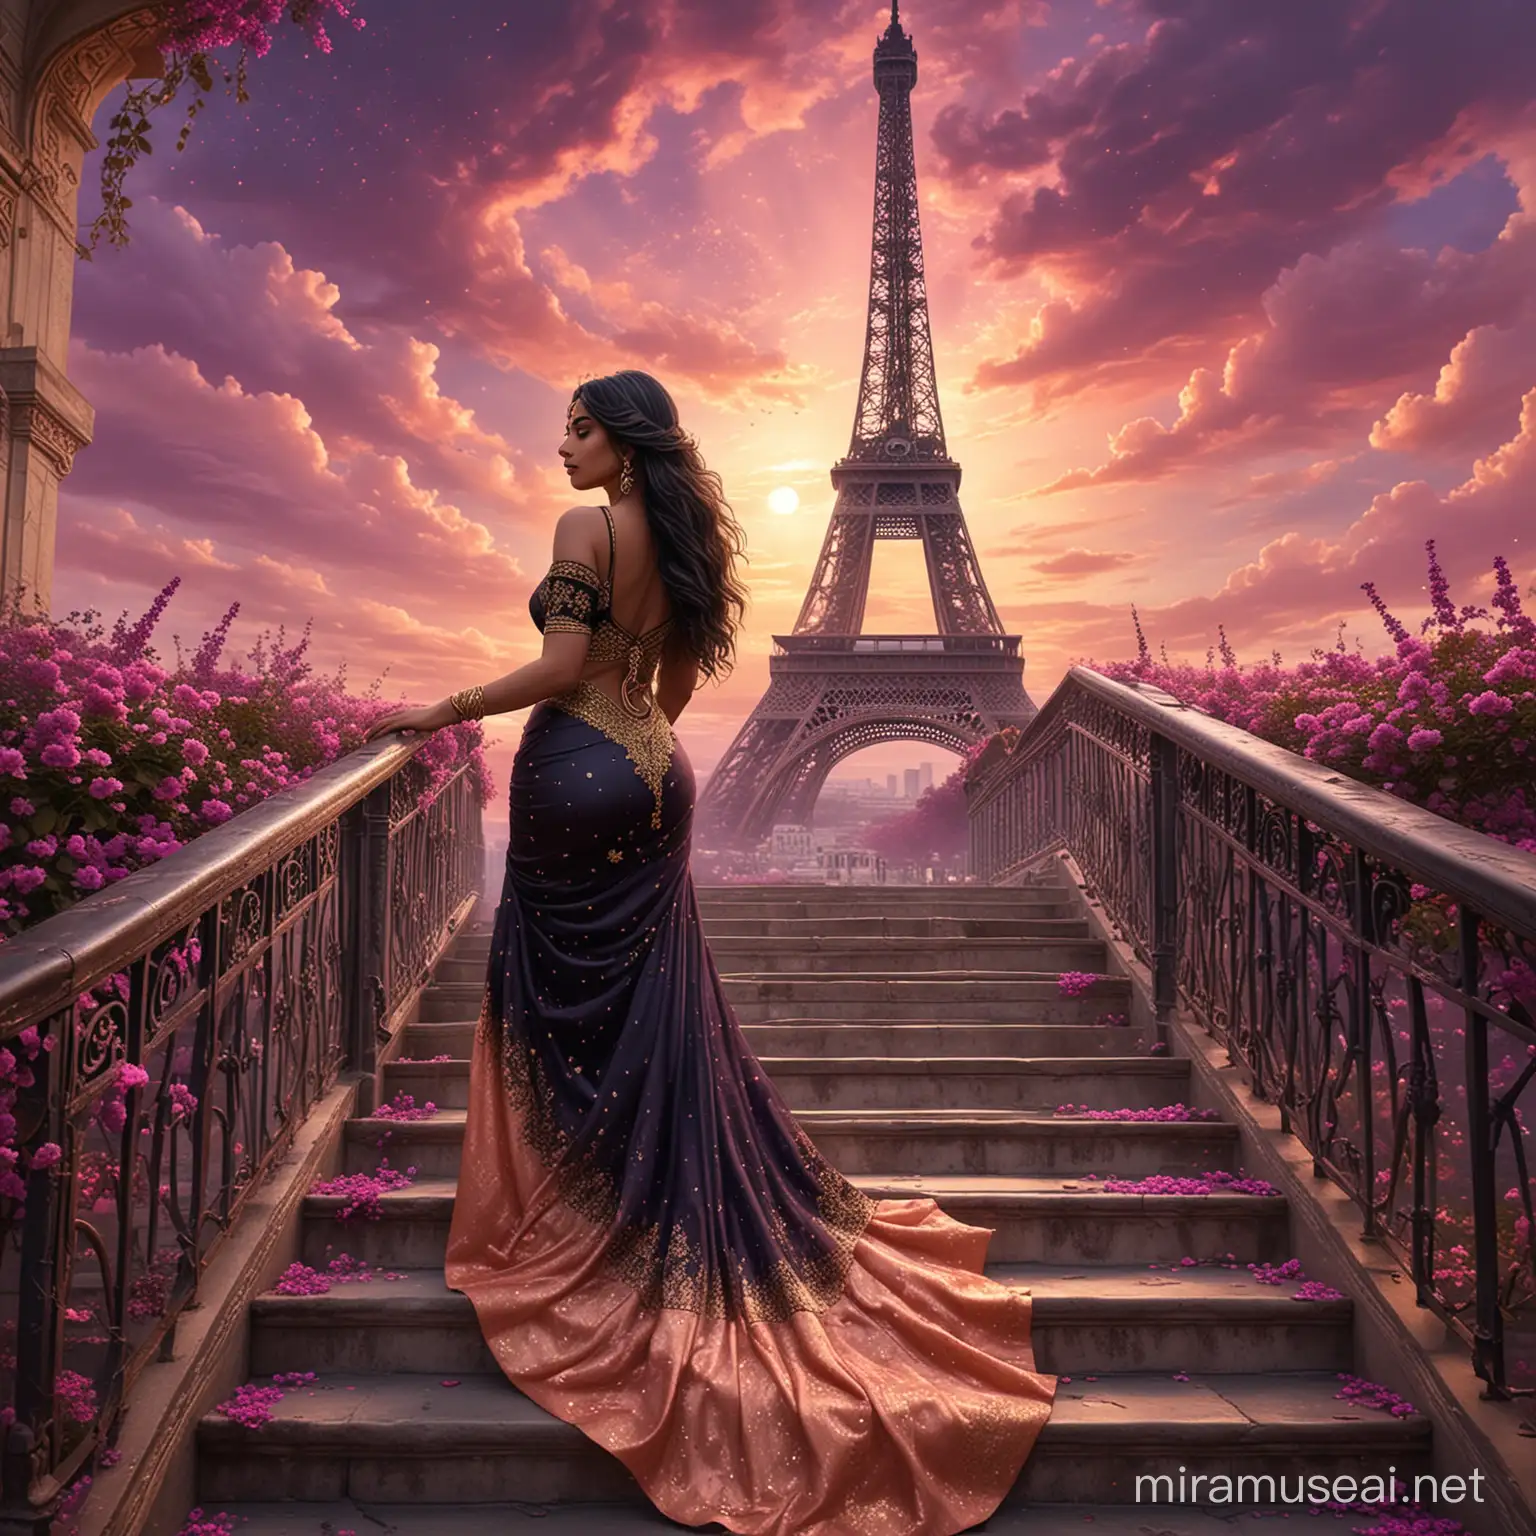 A beautiful indian princess, from behind, standing up in stairs, in a cloudy dark pink sky, surrounded by dark purple flowers and golden dust. Long black wavy hair, long elegant dark salmon and black dress, sari dress, haute couture. Background effel tower decorated with golden light. Background golden nebula in the sky. 8k, fantasy, illustration, digital art, illustration art, fantasy art, fantasy style